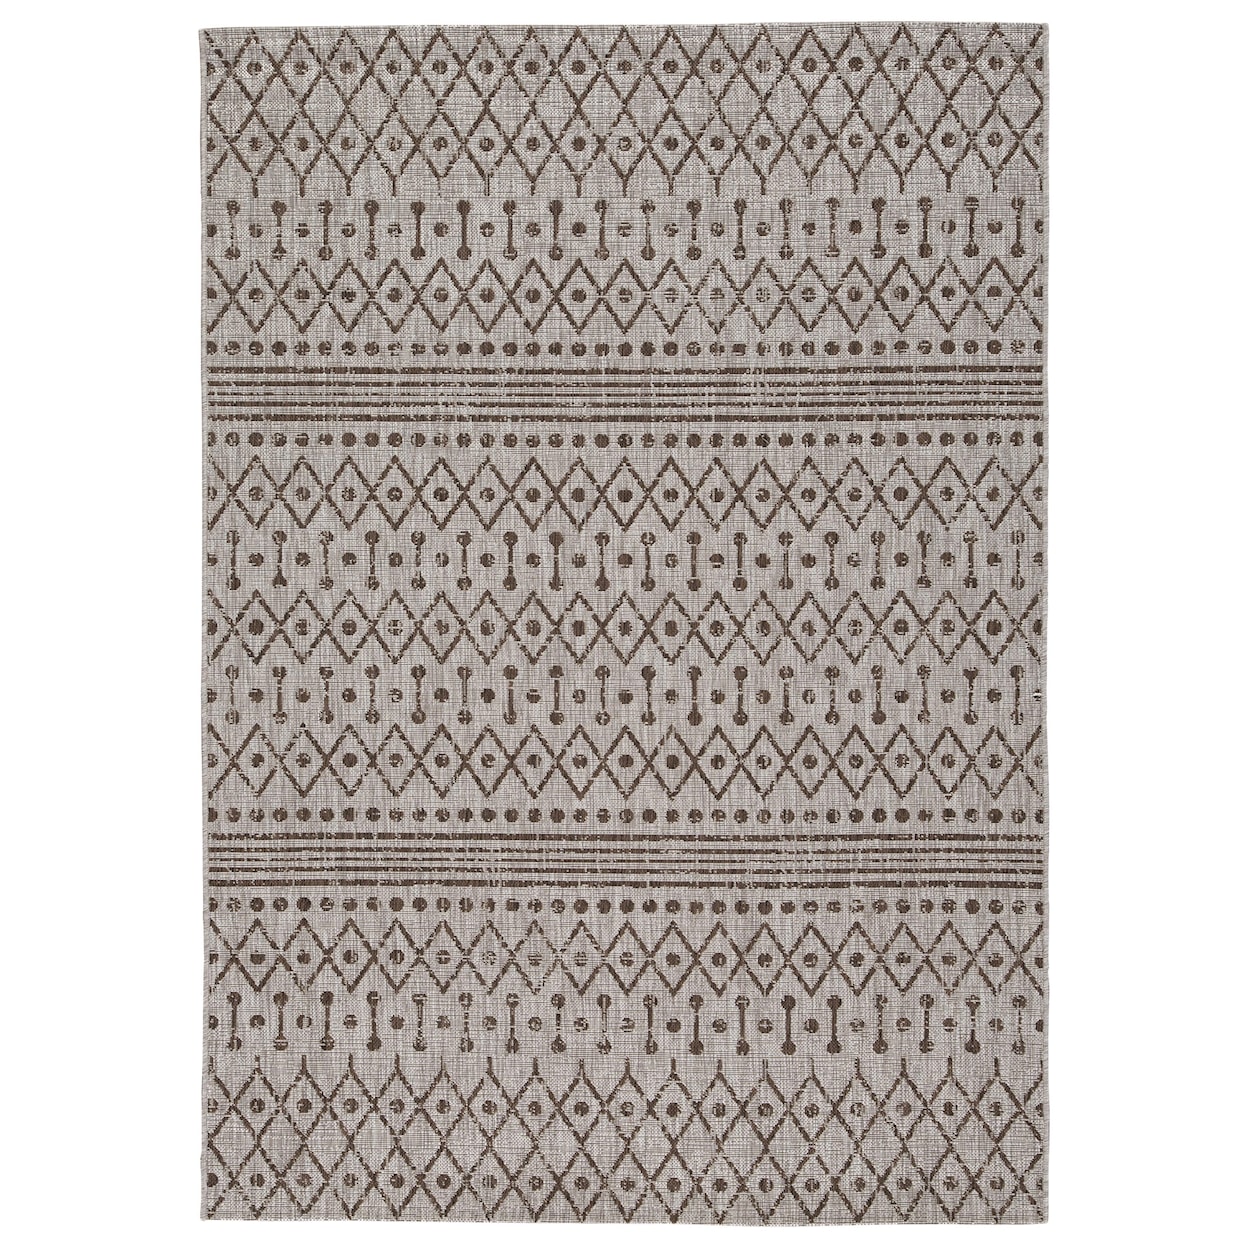 Signature Design by Ashley Dubot 5x7 Indoor/Outdoor Rug